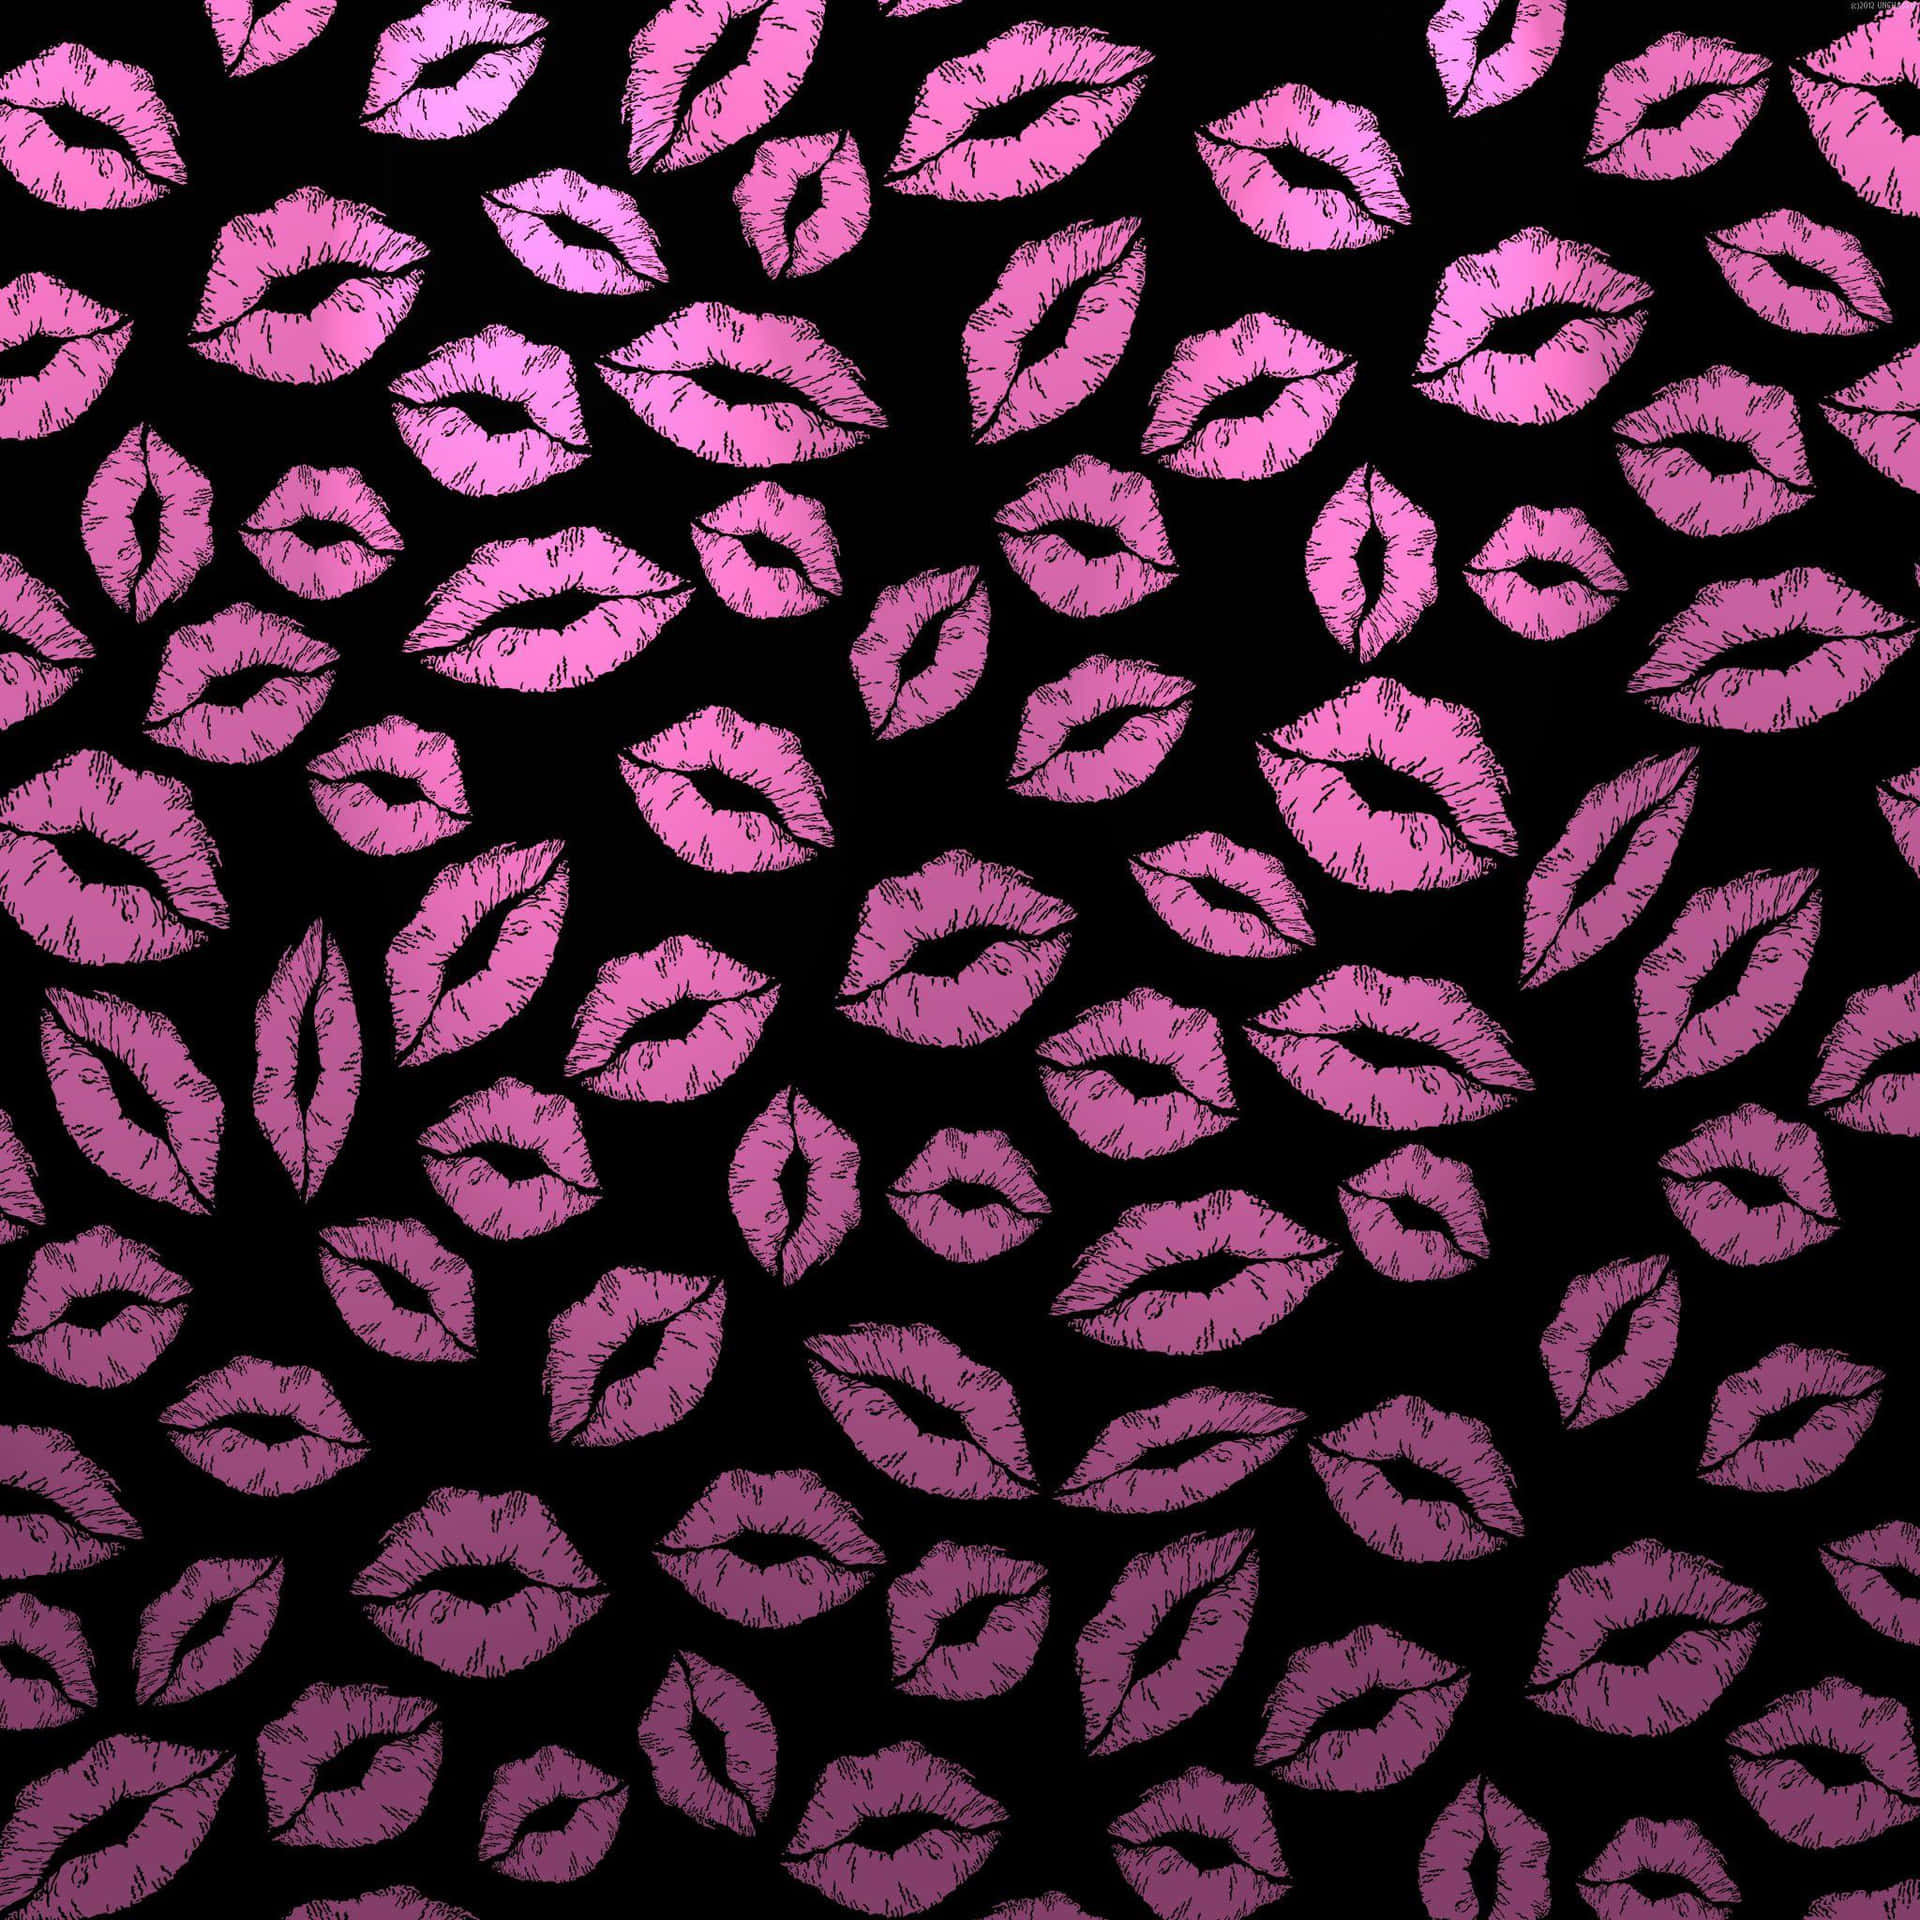 Brighten up your day with this vibrant pink and black abstract wallpaper